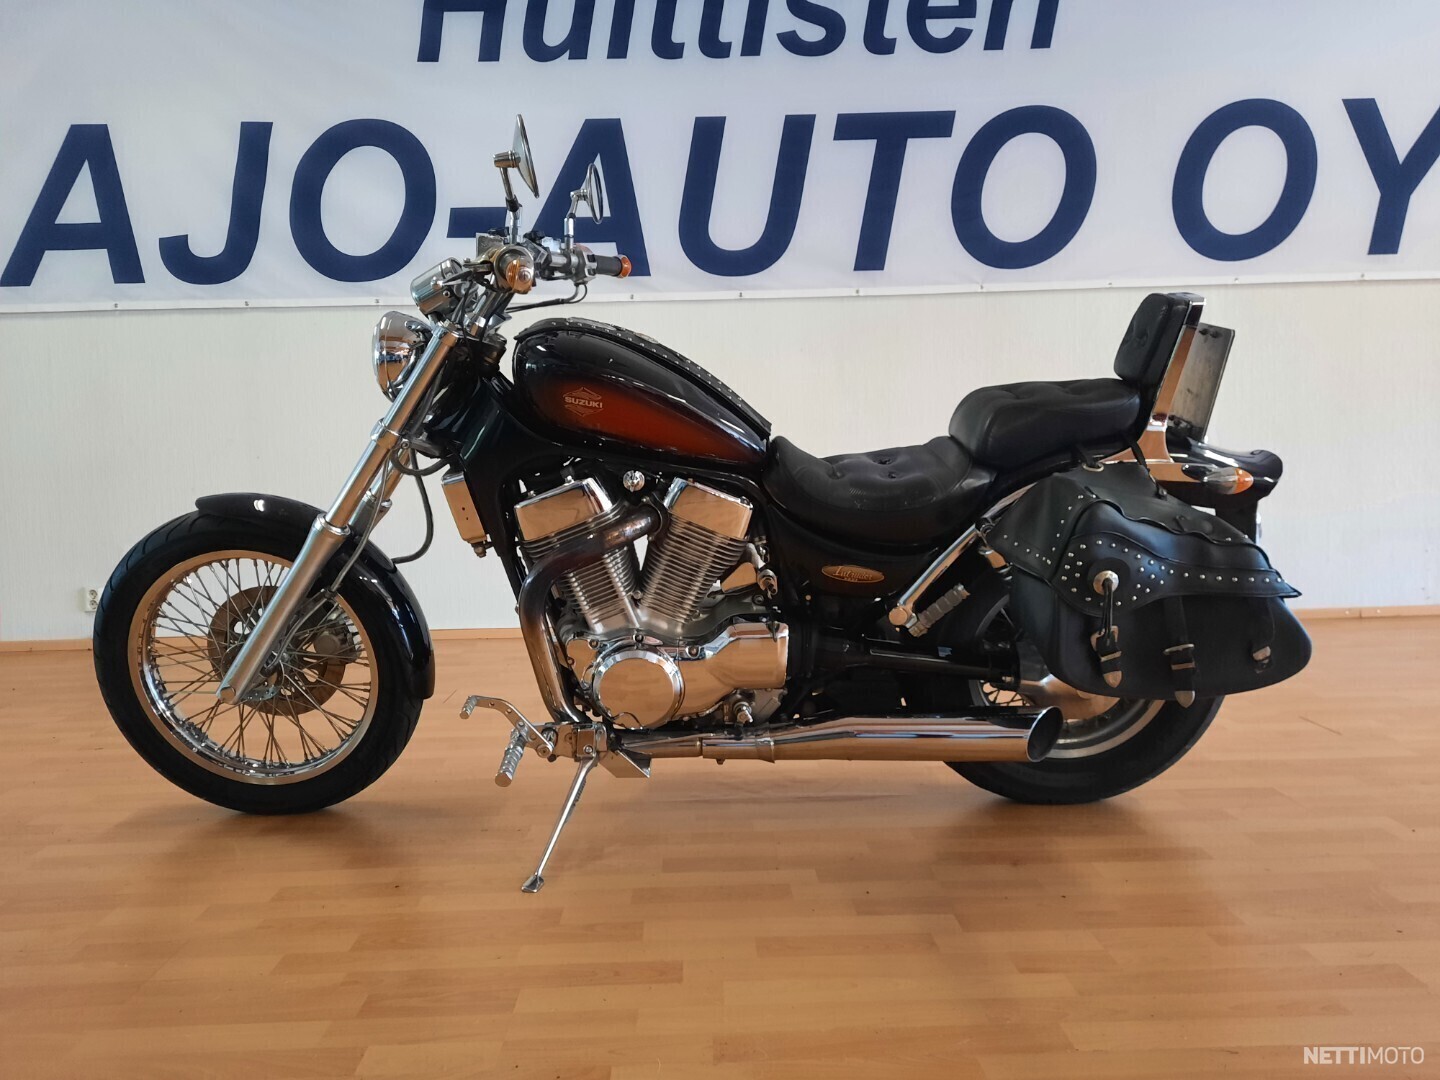 Choppertown - Check out our bro JC Muniz new build - Suzuki intruder 1400  1995. He usually builds Harley's , but it's evident his talents go way  beyond that.